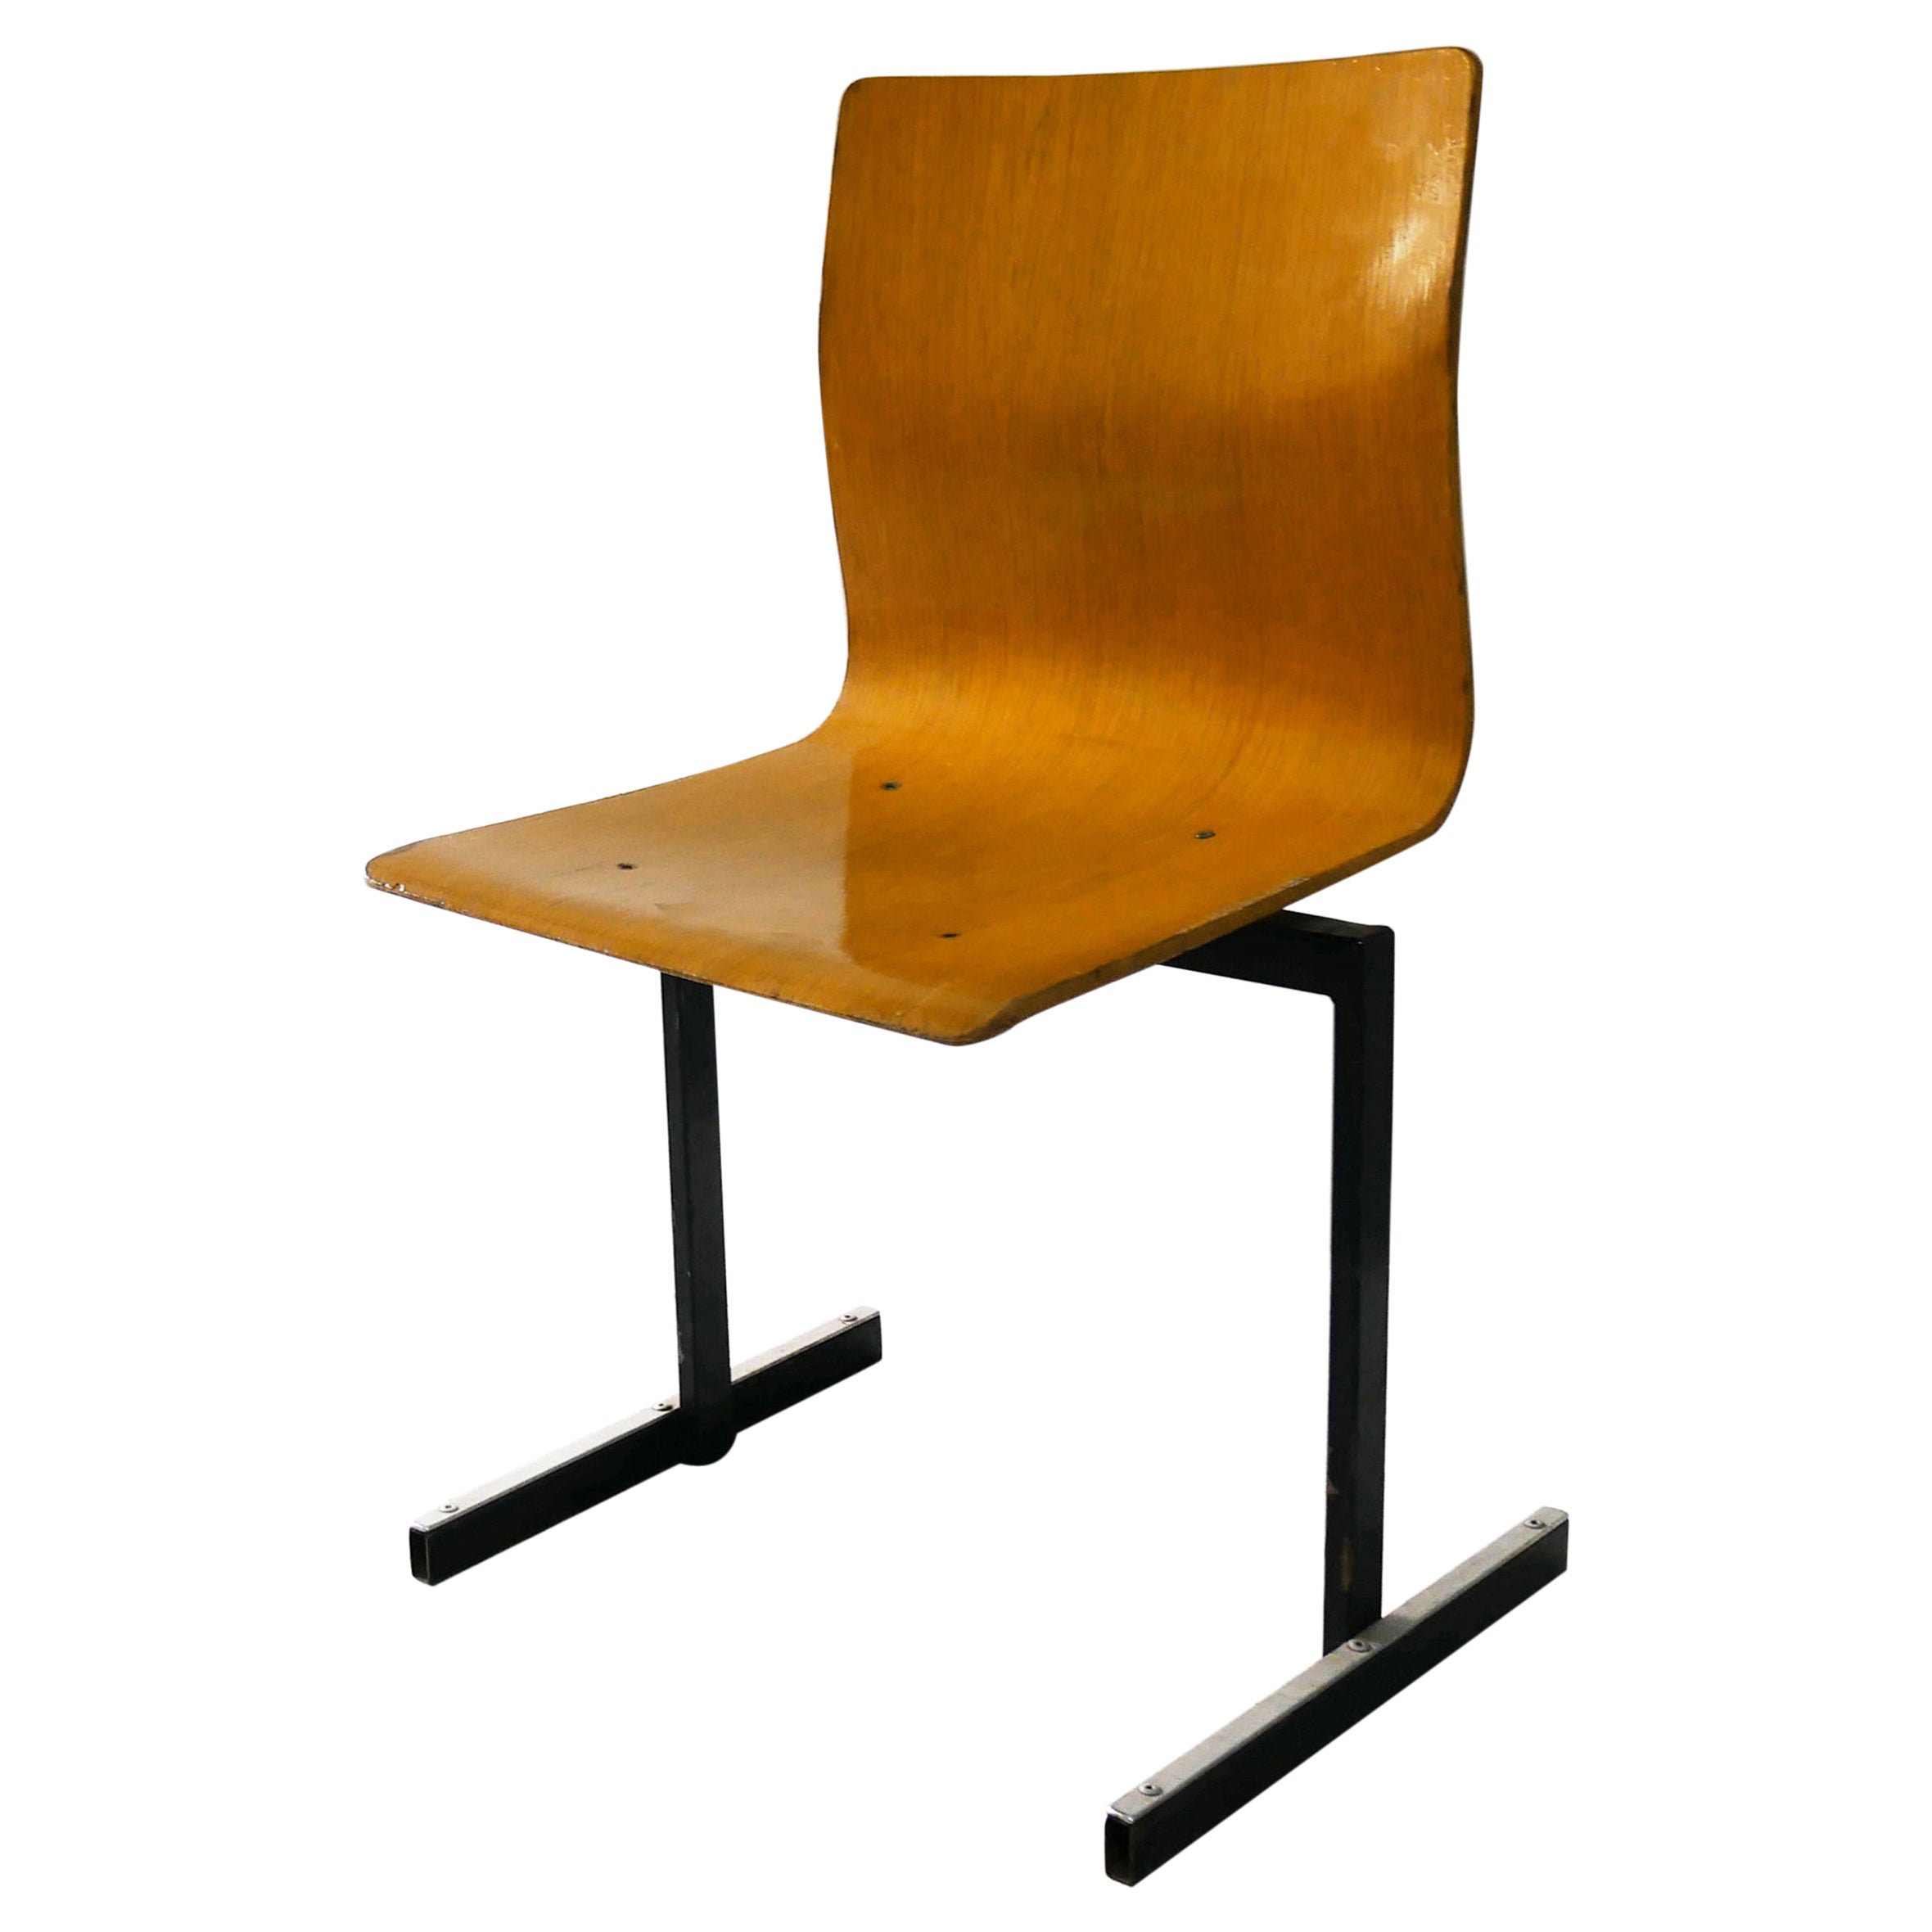 Danish 1970’s Mid Century Chair by Niels Larsen/3 Available/Price is for 1 Chair